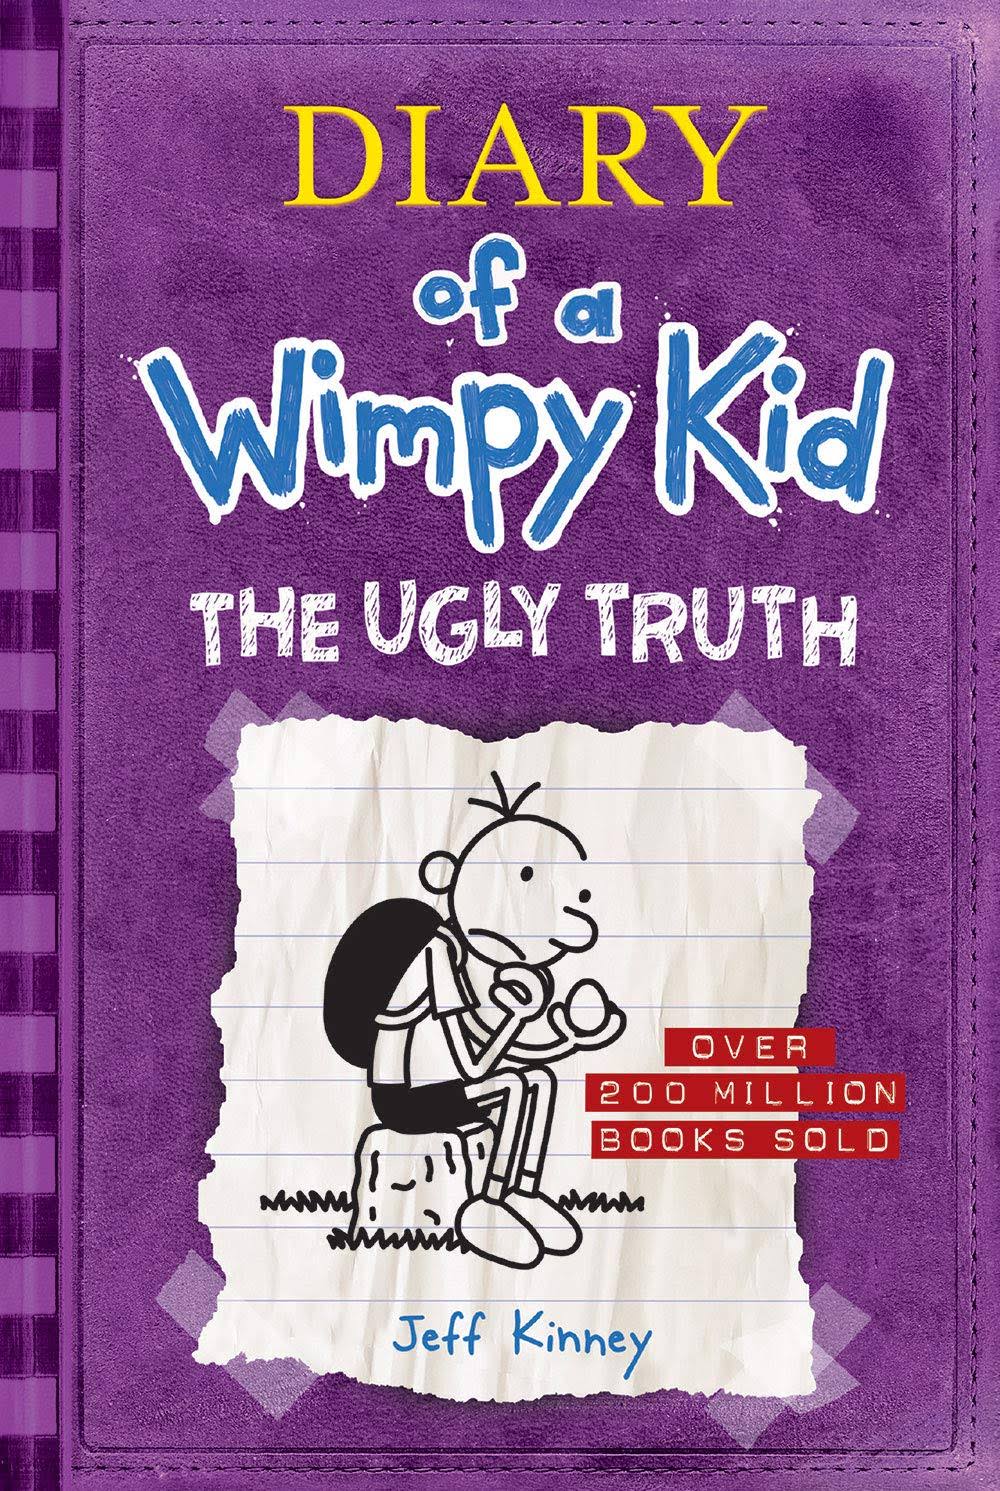 The Ugly Truth (Diary of a Wimpy Kid #5) [Book]